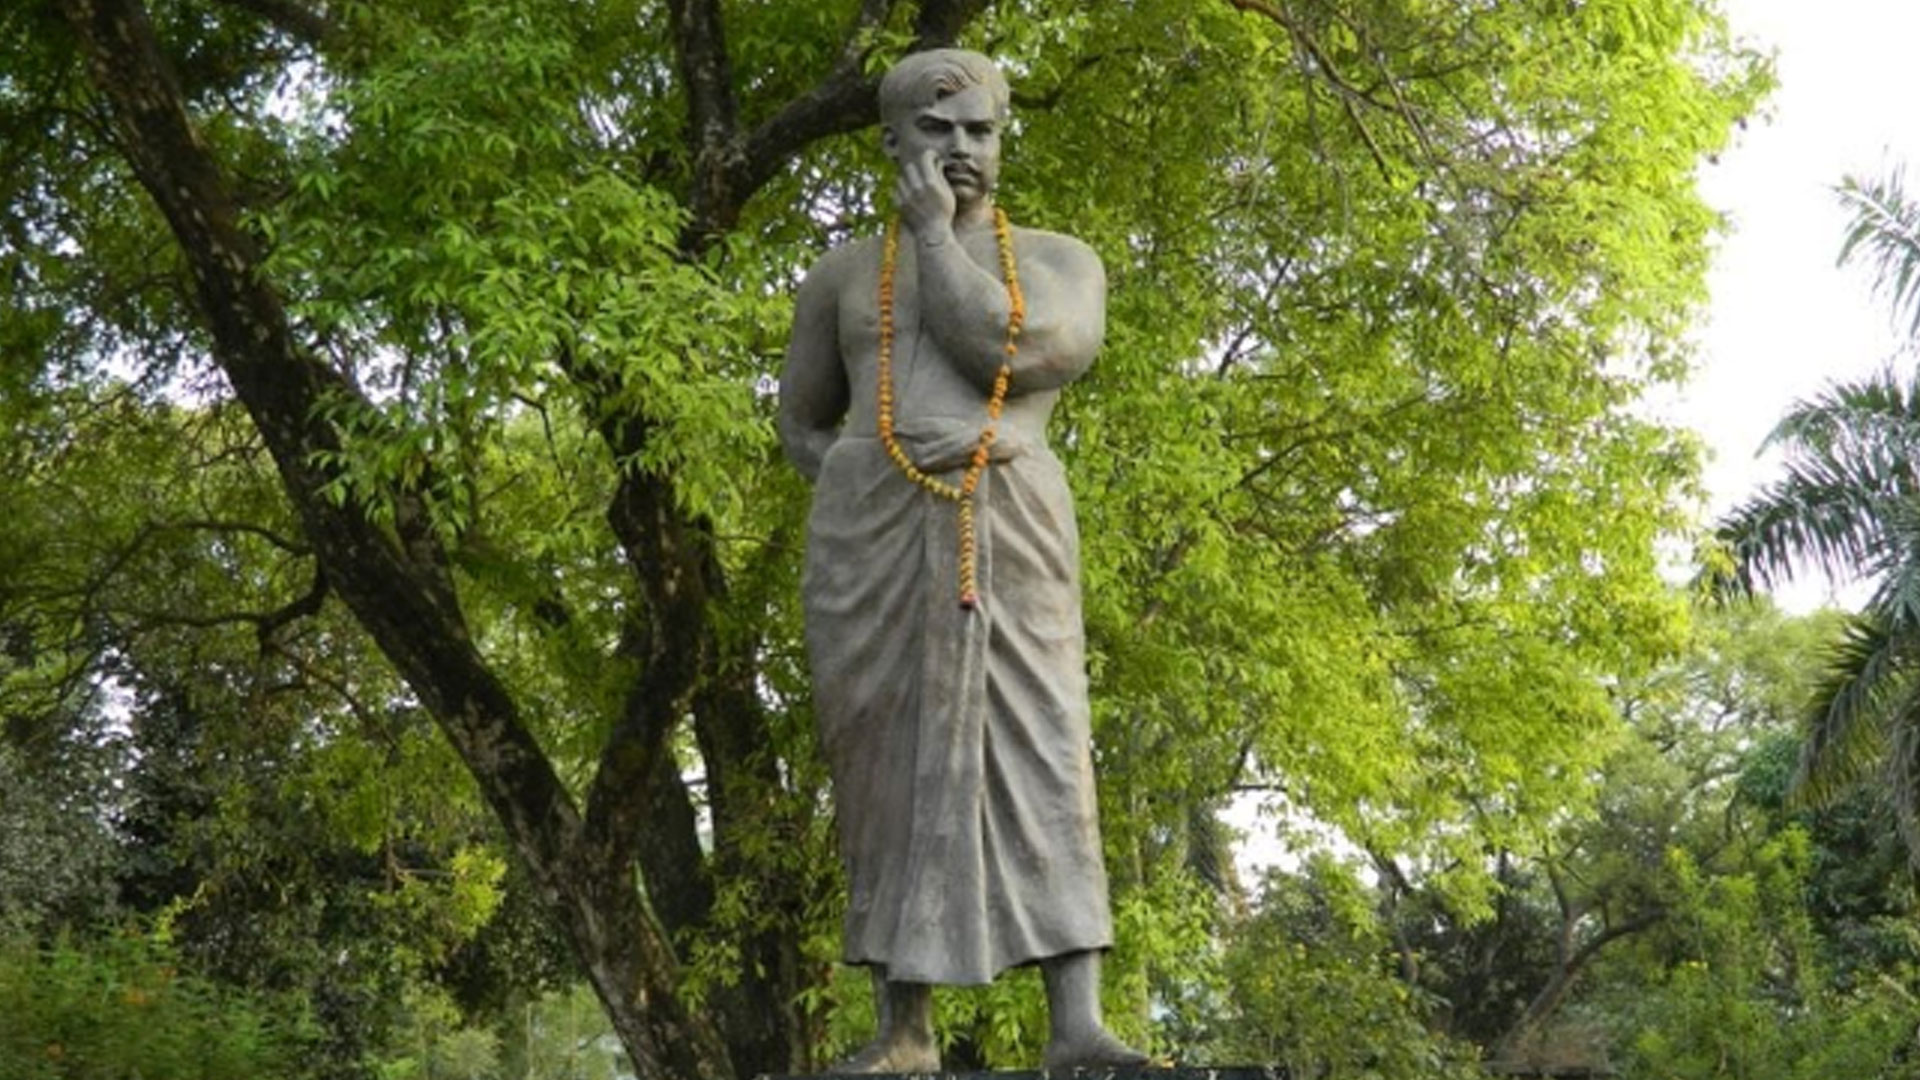 History of Kanpur is alive due to its statues